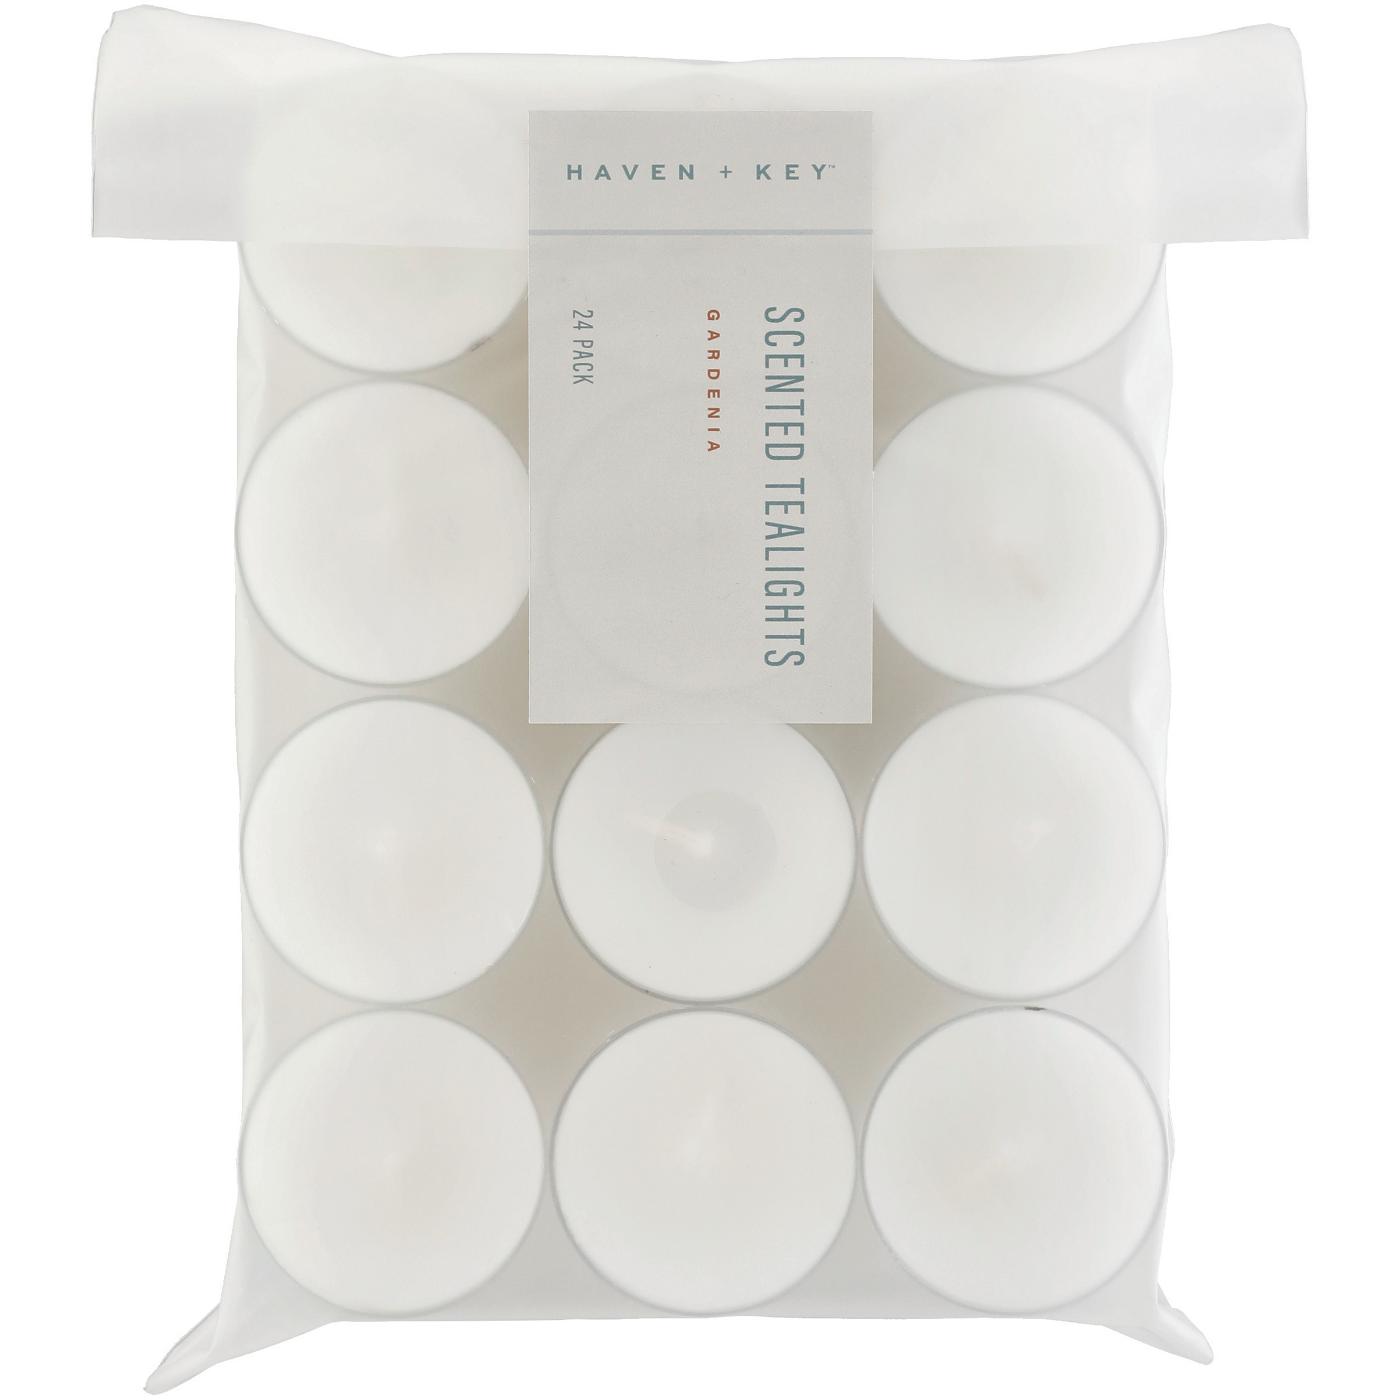 Haven + Key Gardenia Scented Tealights; image 1 of 2